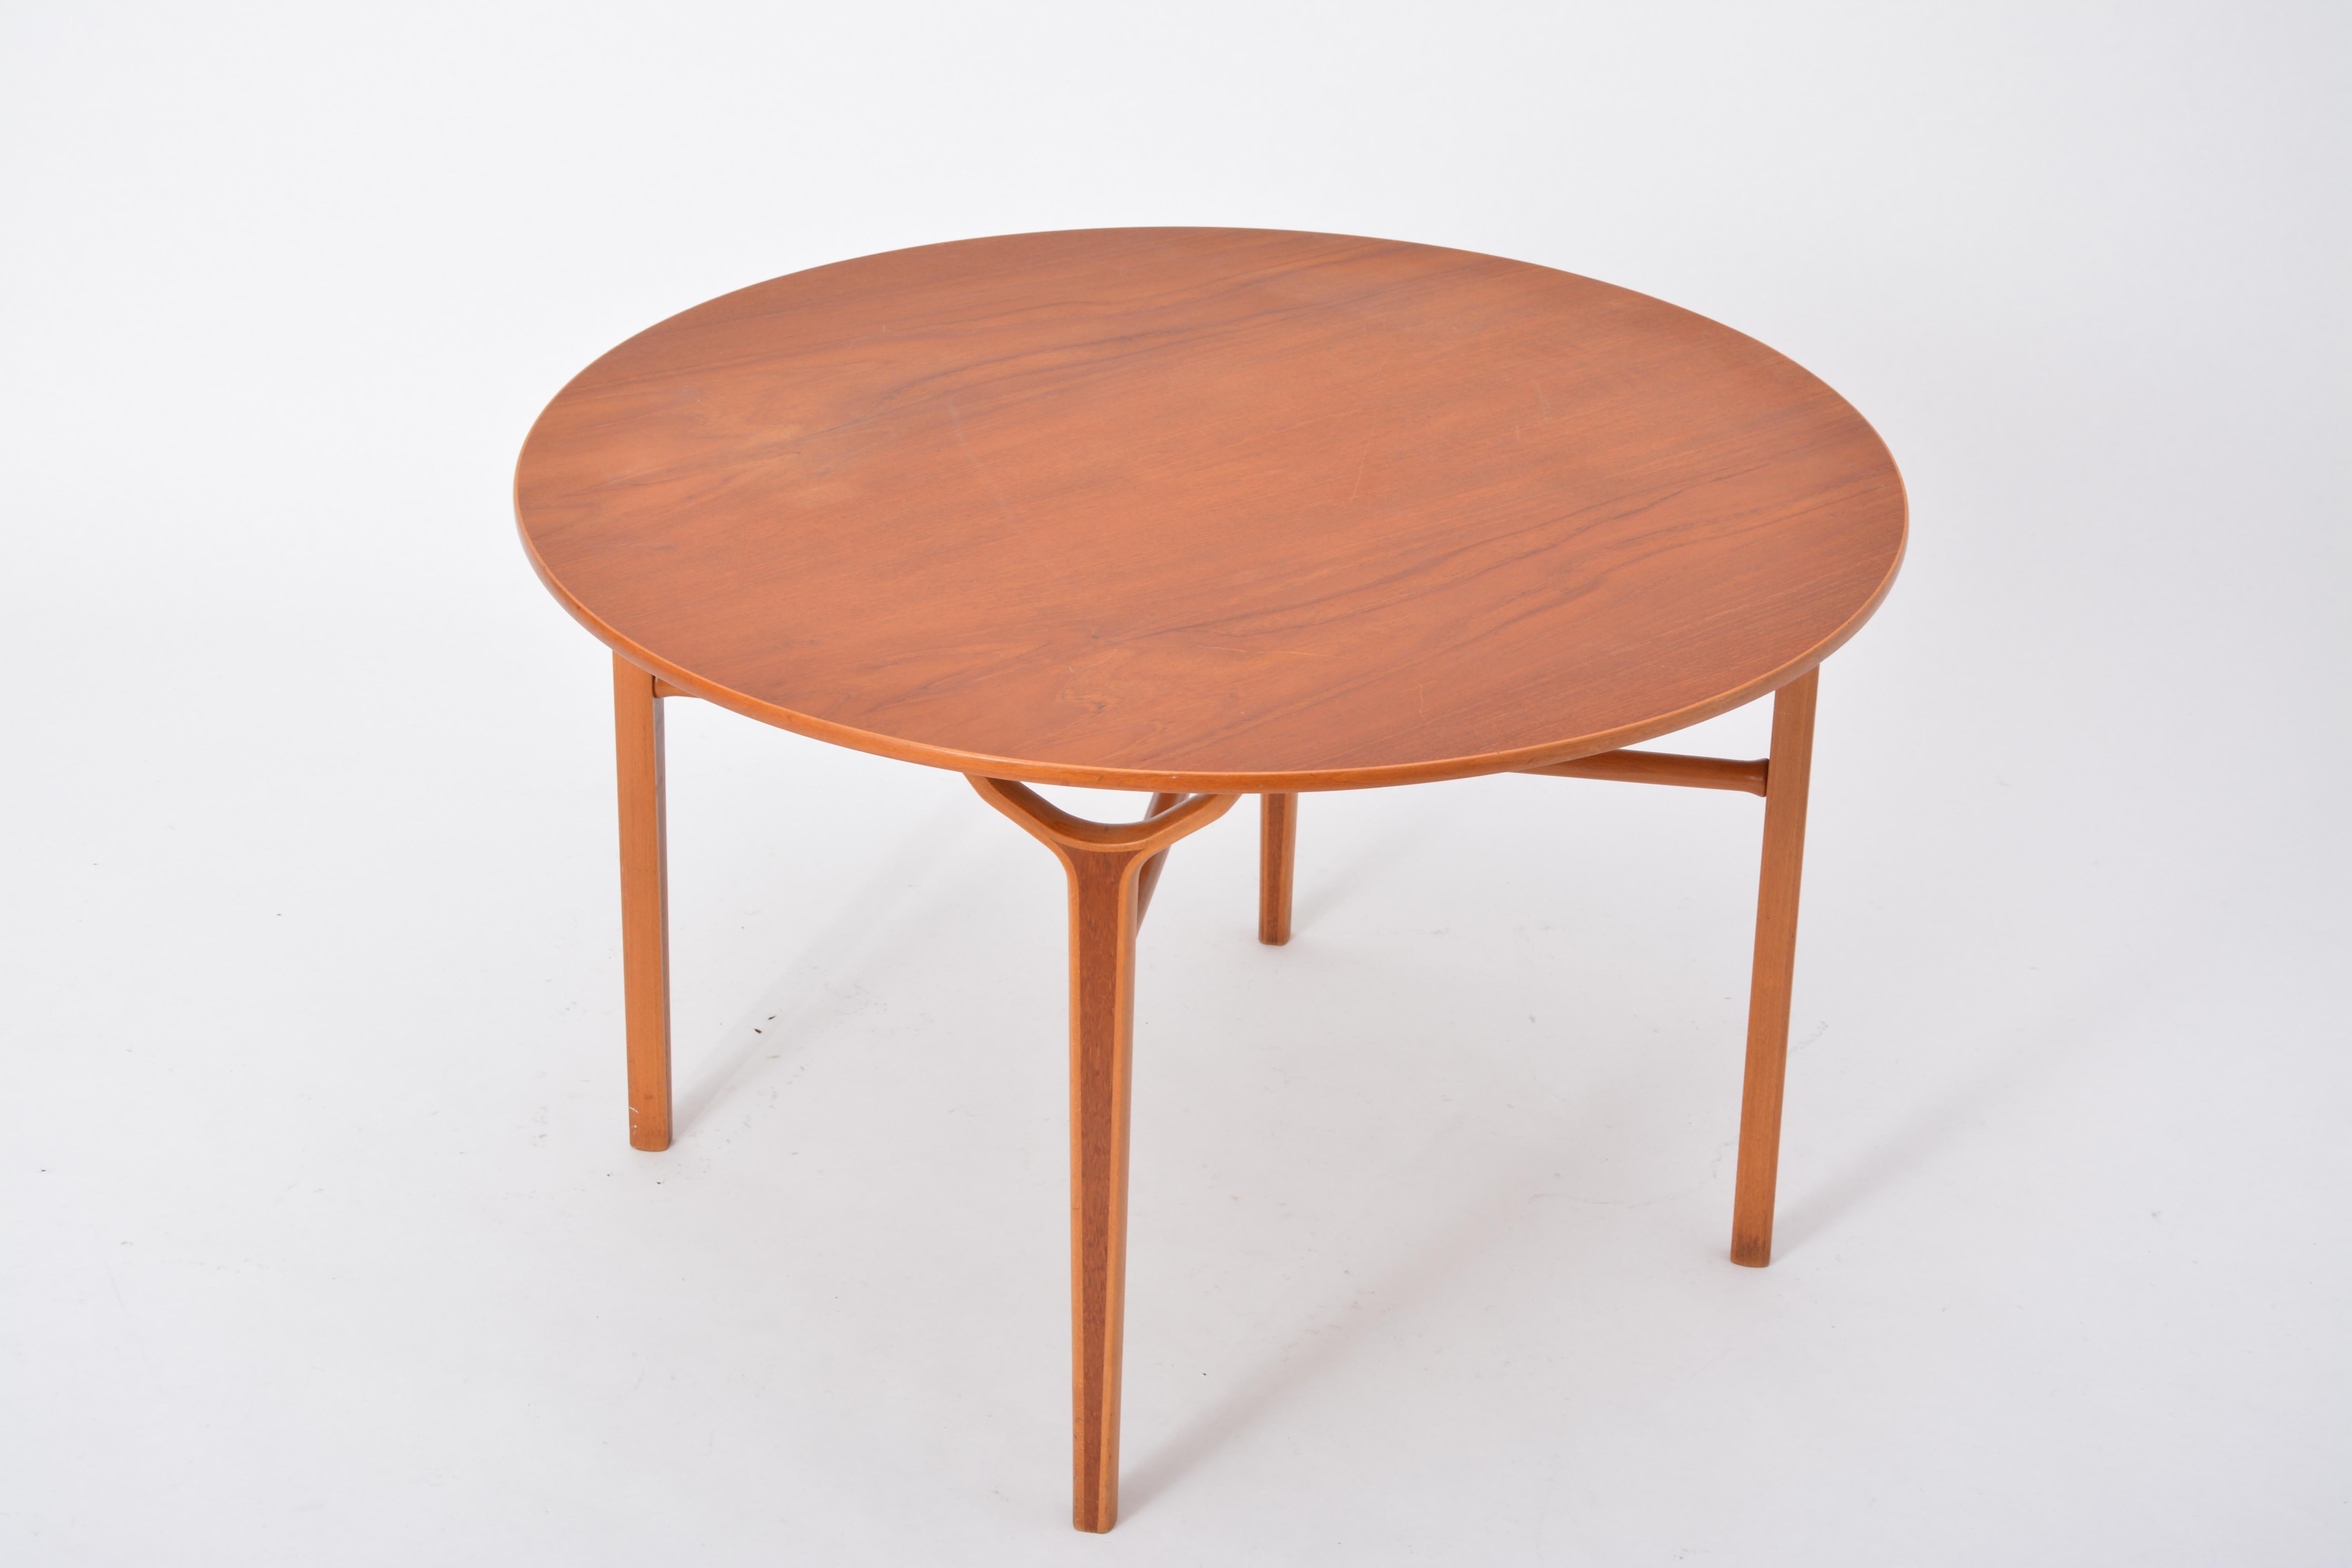 Danish Mid-Century Modern Ax table by Peter Hvidt and Orla Mølgaard-Nielsen

This coffee table was designed in the 1950s by Peter Hvidt and Orla Molgaard Nielsen. It is from the renowned Ax series which is known for furniture with interestingly